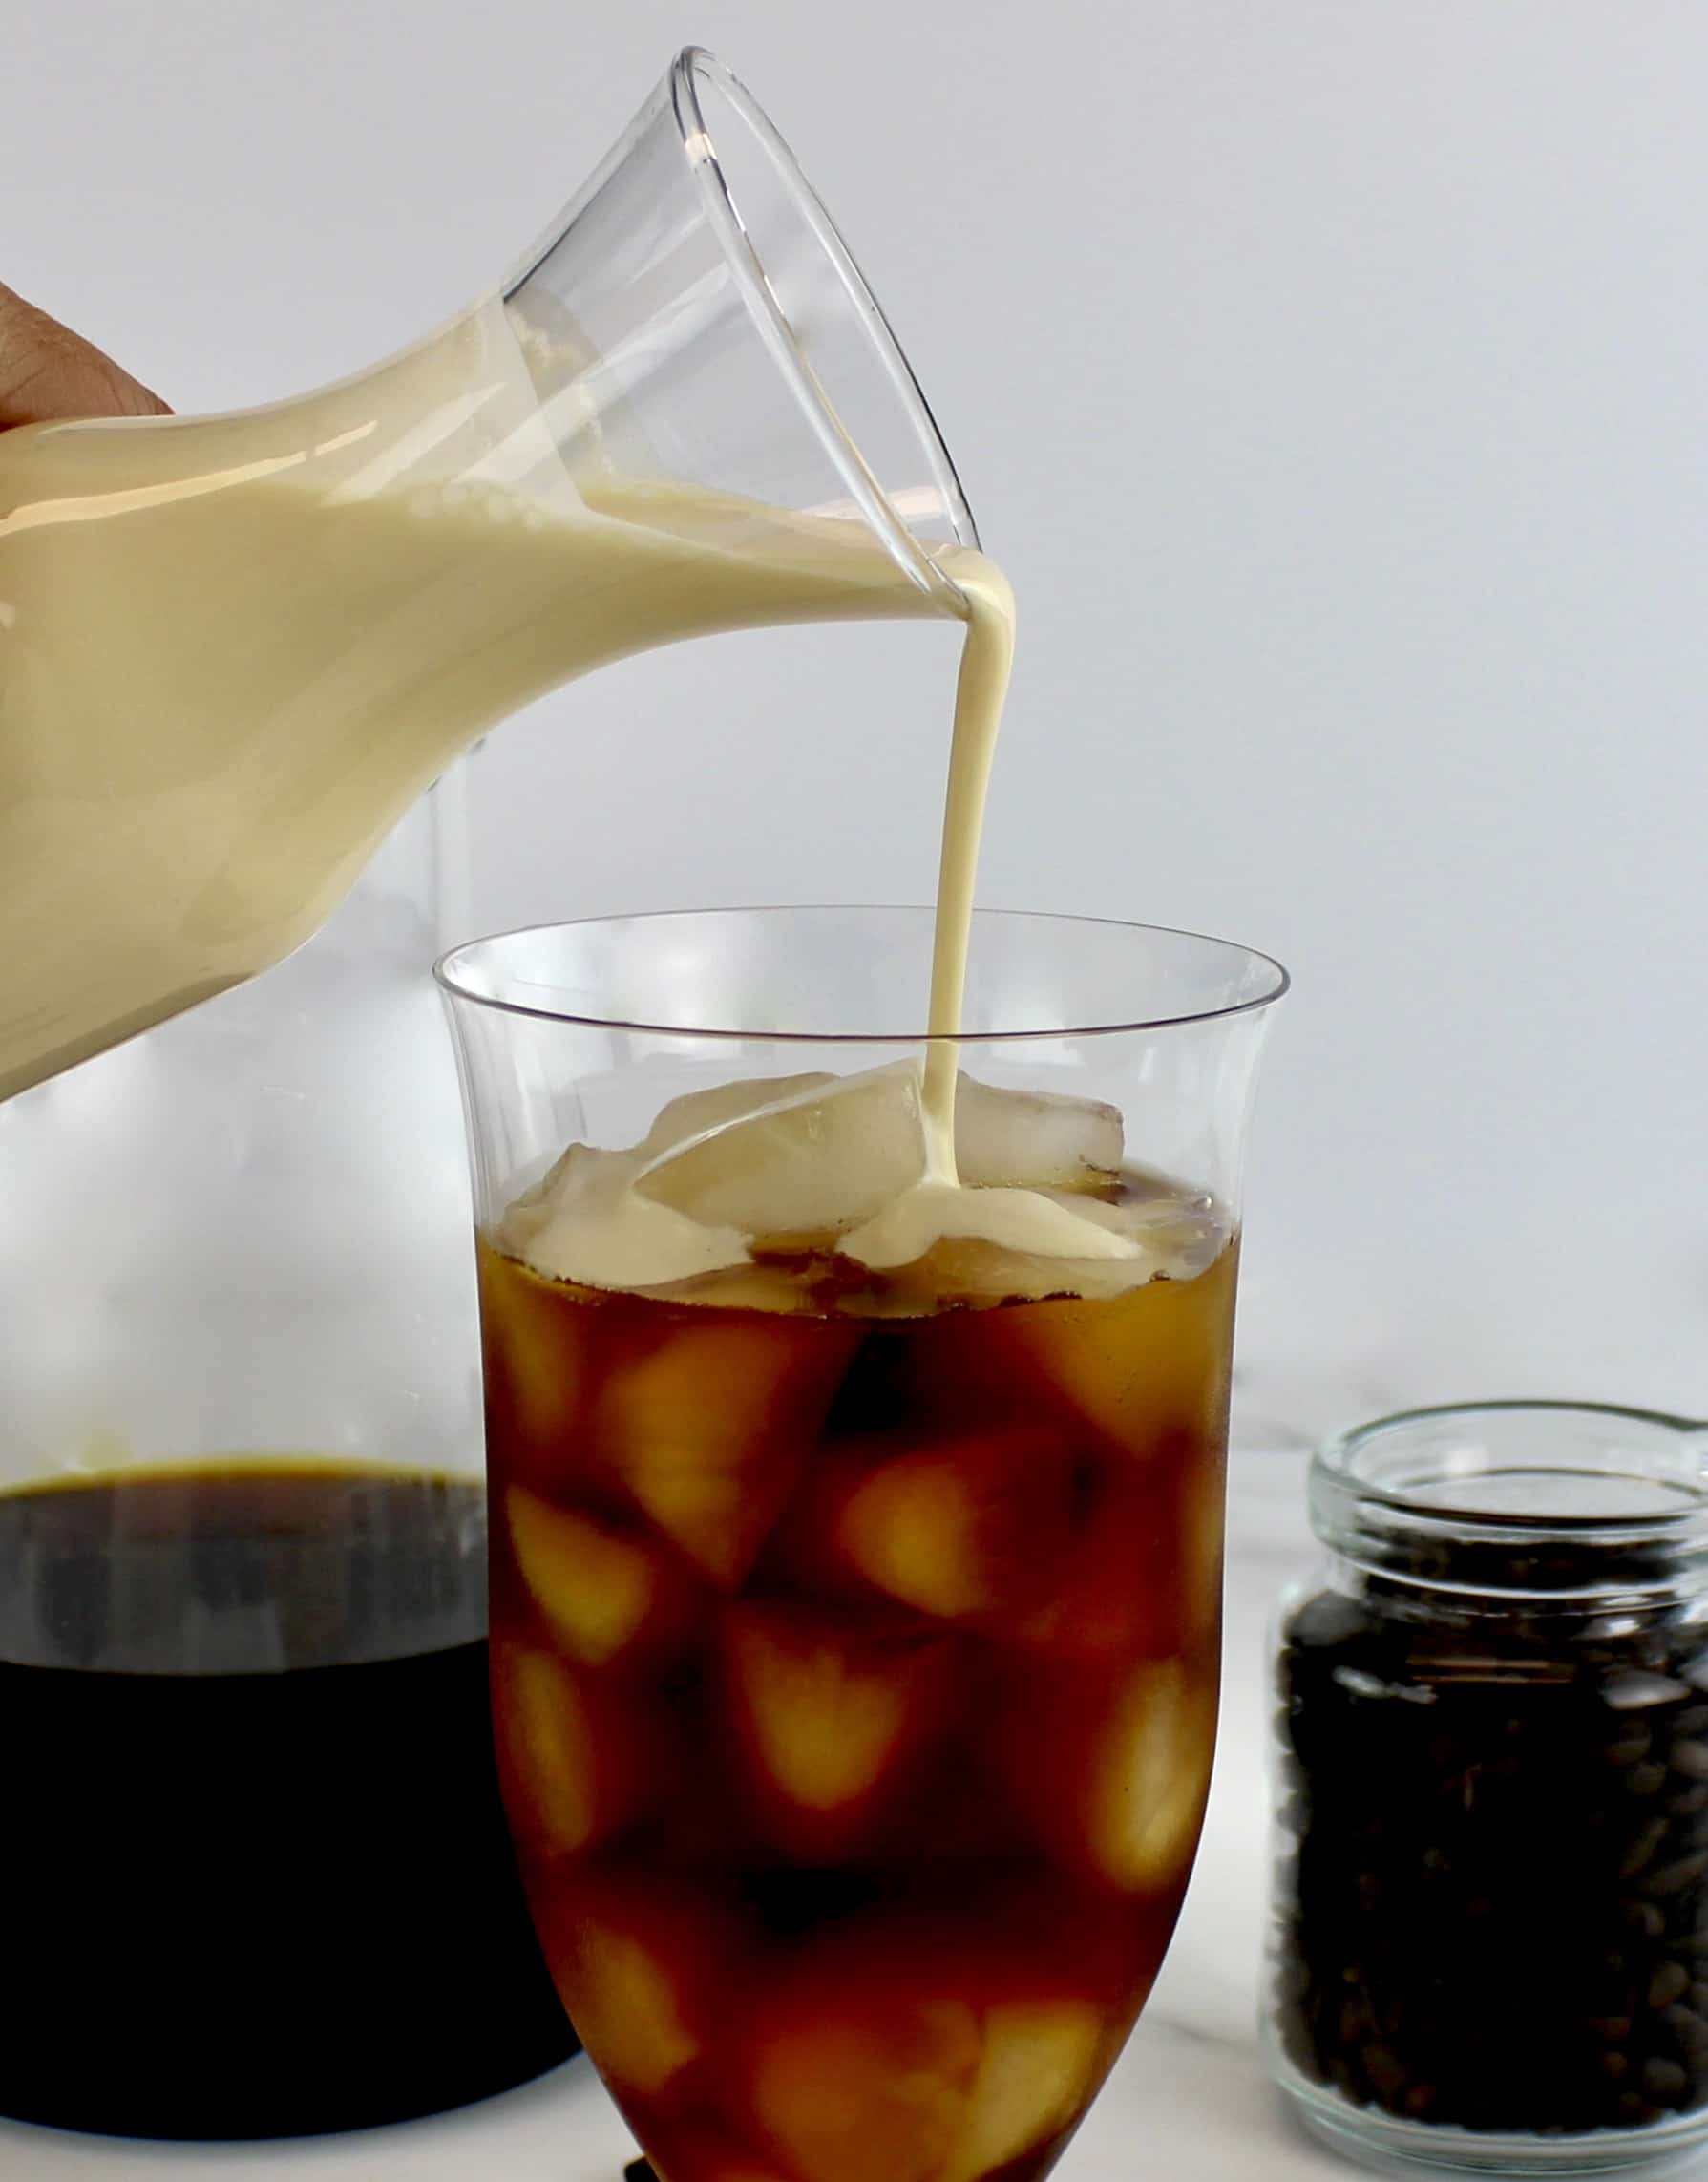 creamer being poured over iced coffee in glass